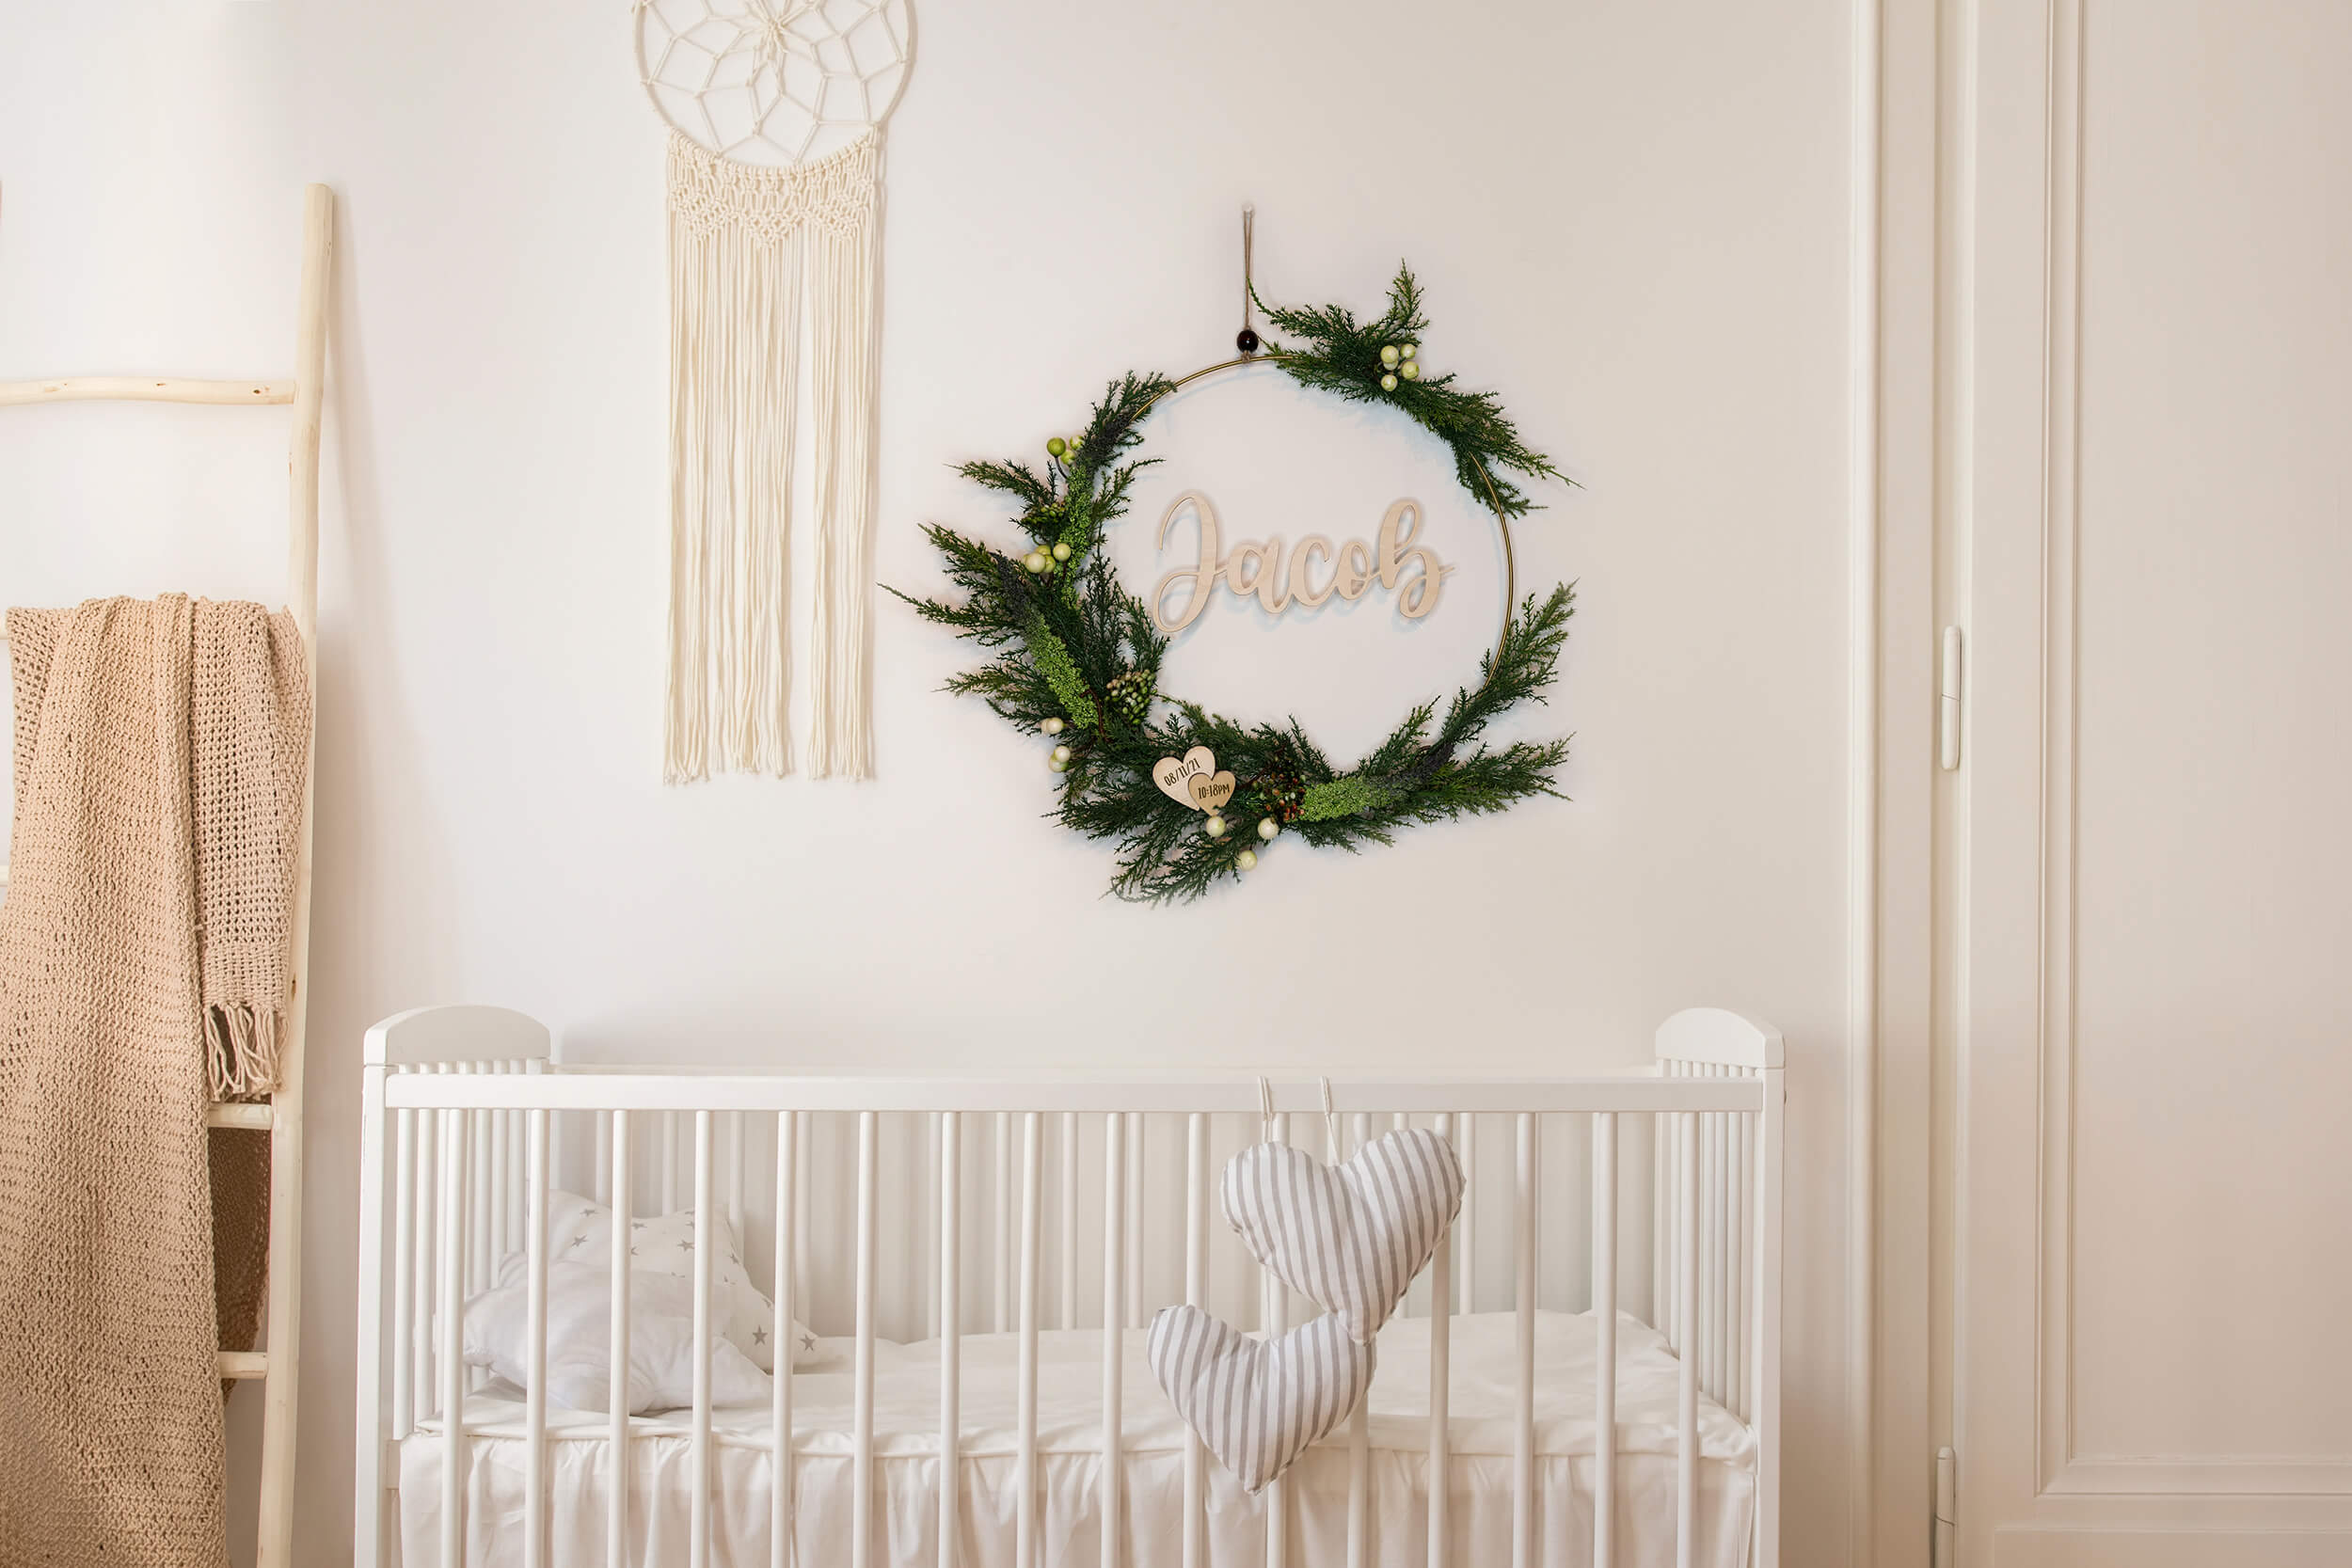 Cypress Baby Name Wreath